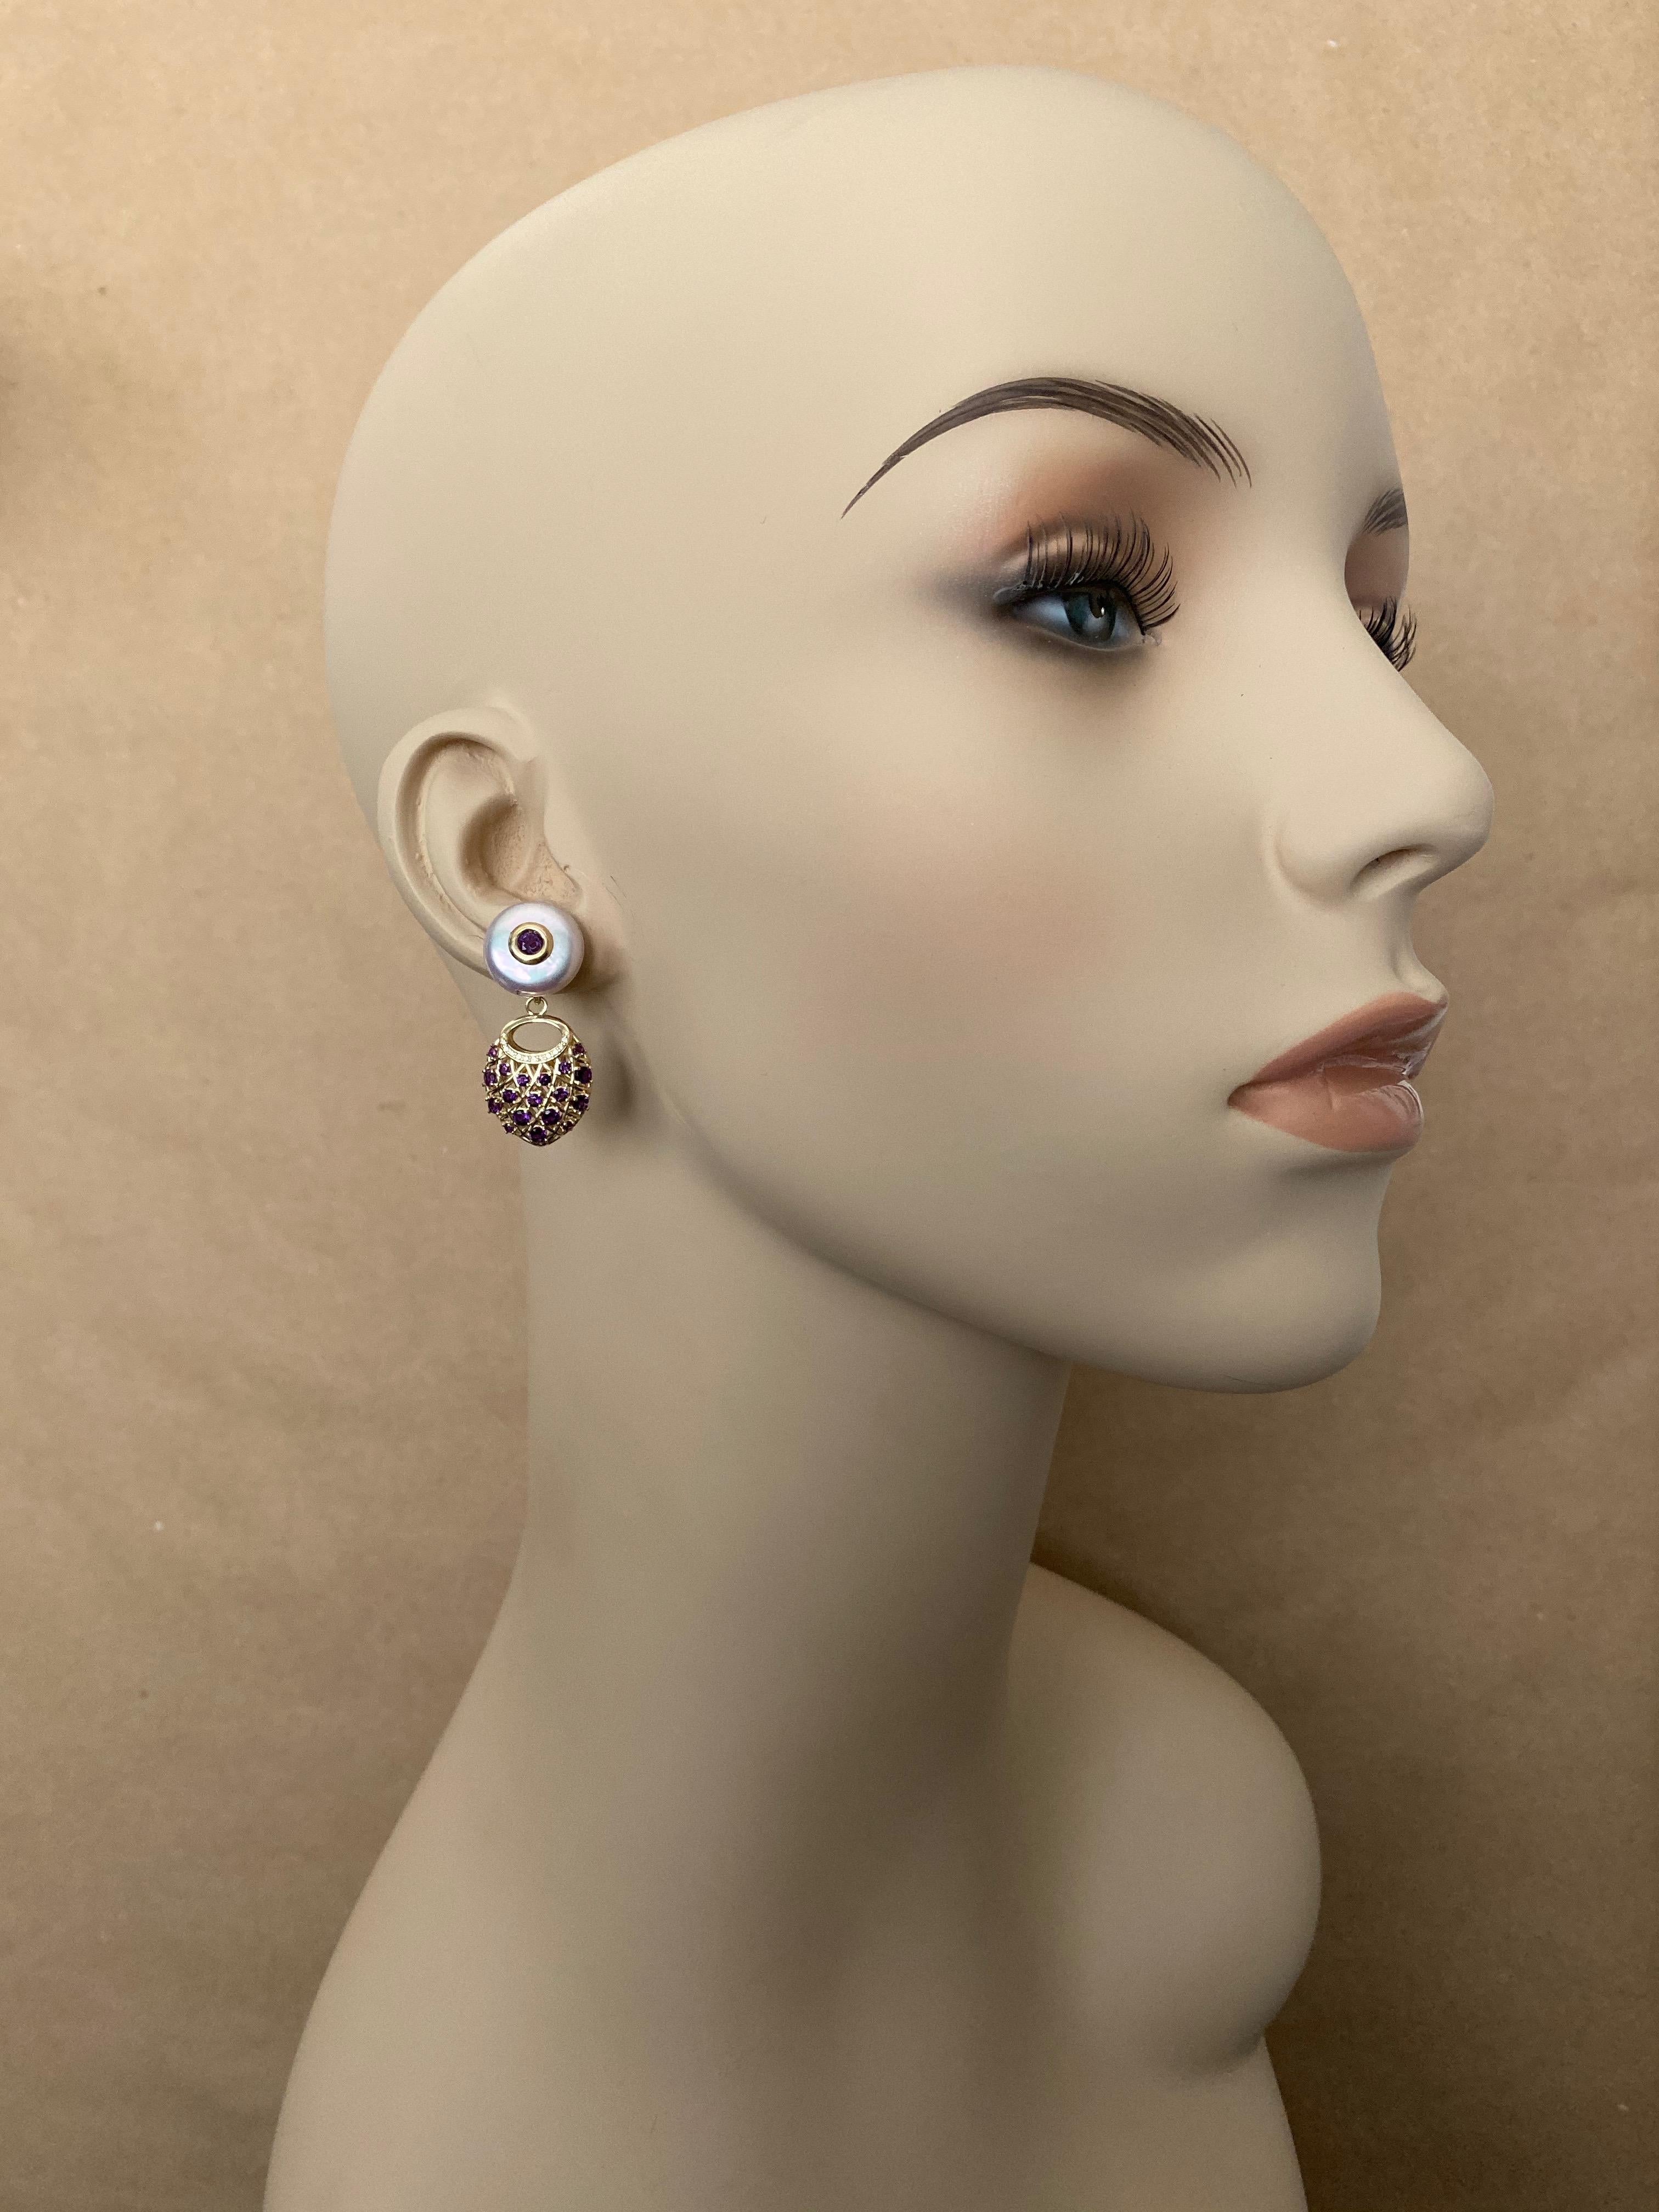 Amethyst are set in pear shaped basket weave drops in this dainty dangle earrings.   Micro-pave diamonds add detail.  The drops are suspended from 14mm pastel colored coin pearls.  The pearls have been drilled and set into each, a matching bezel set